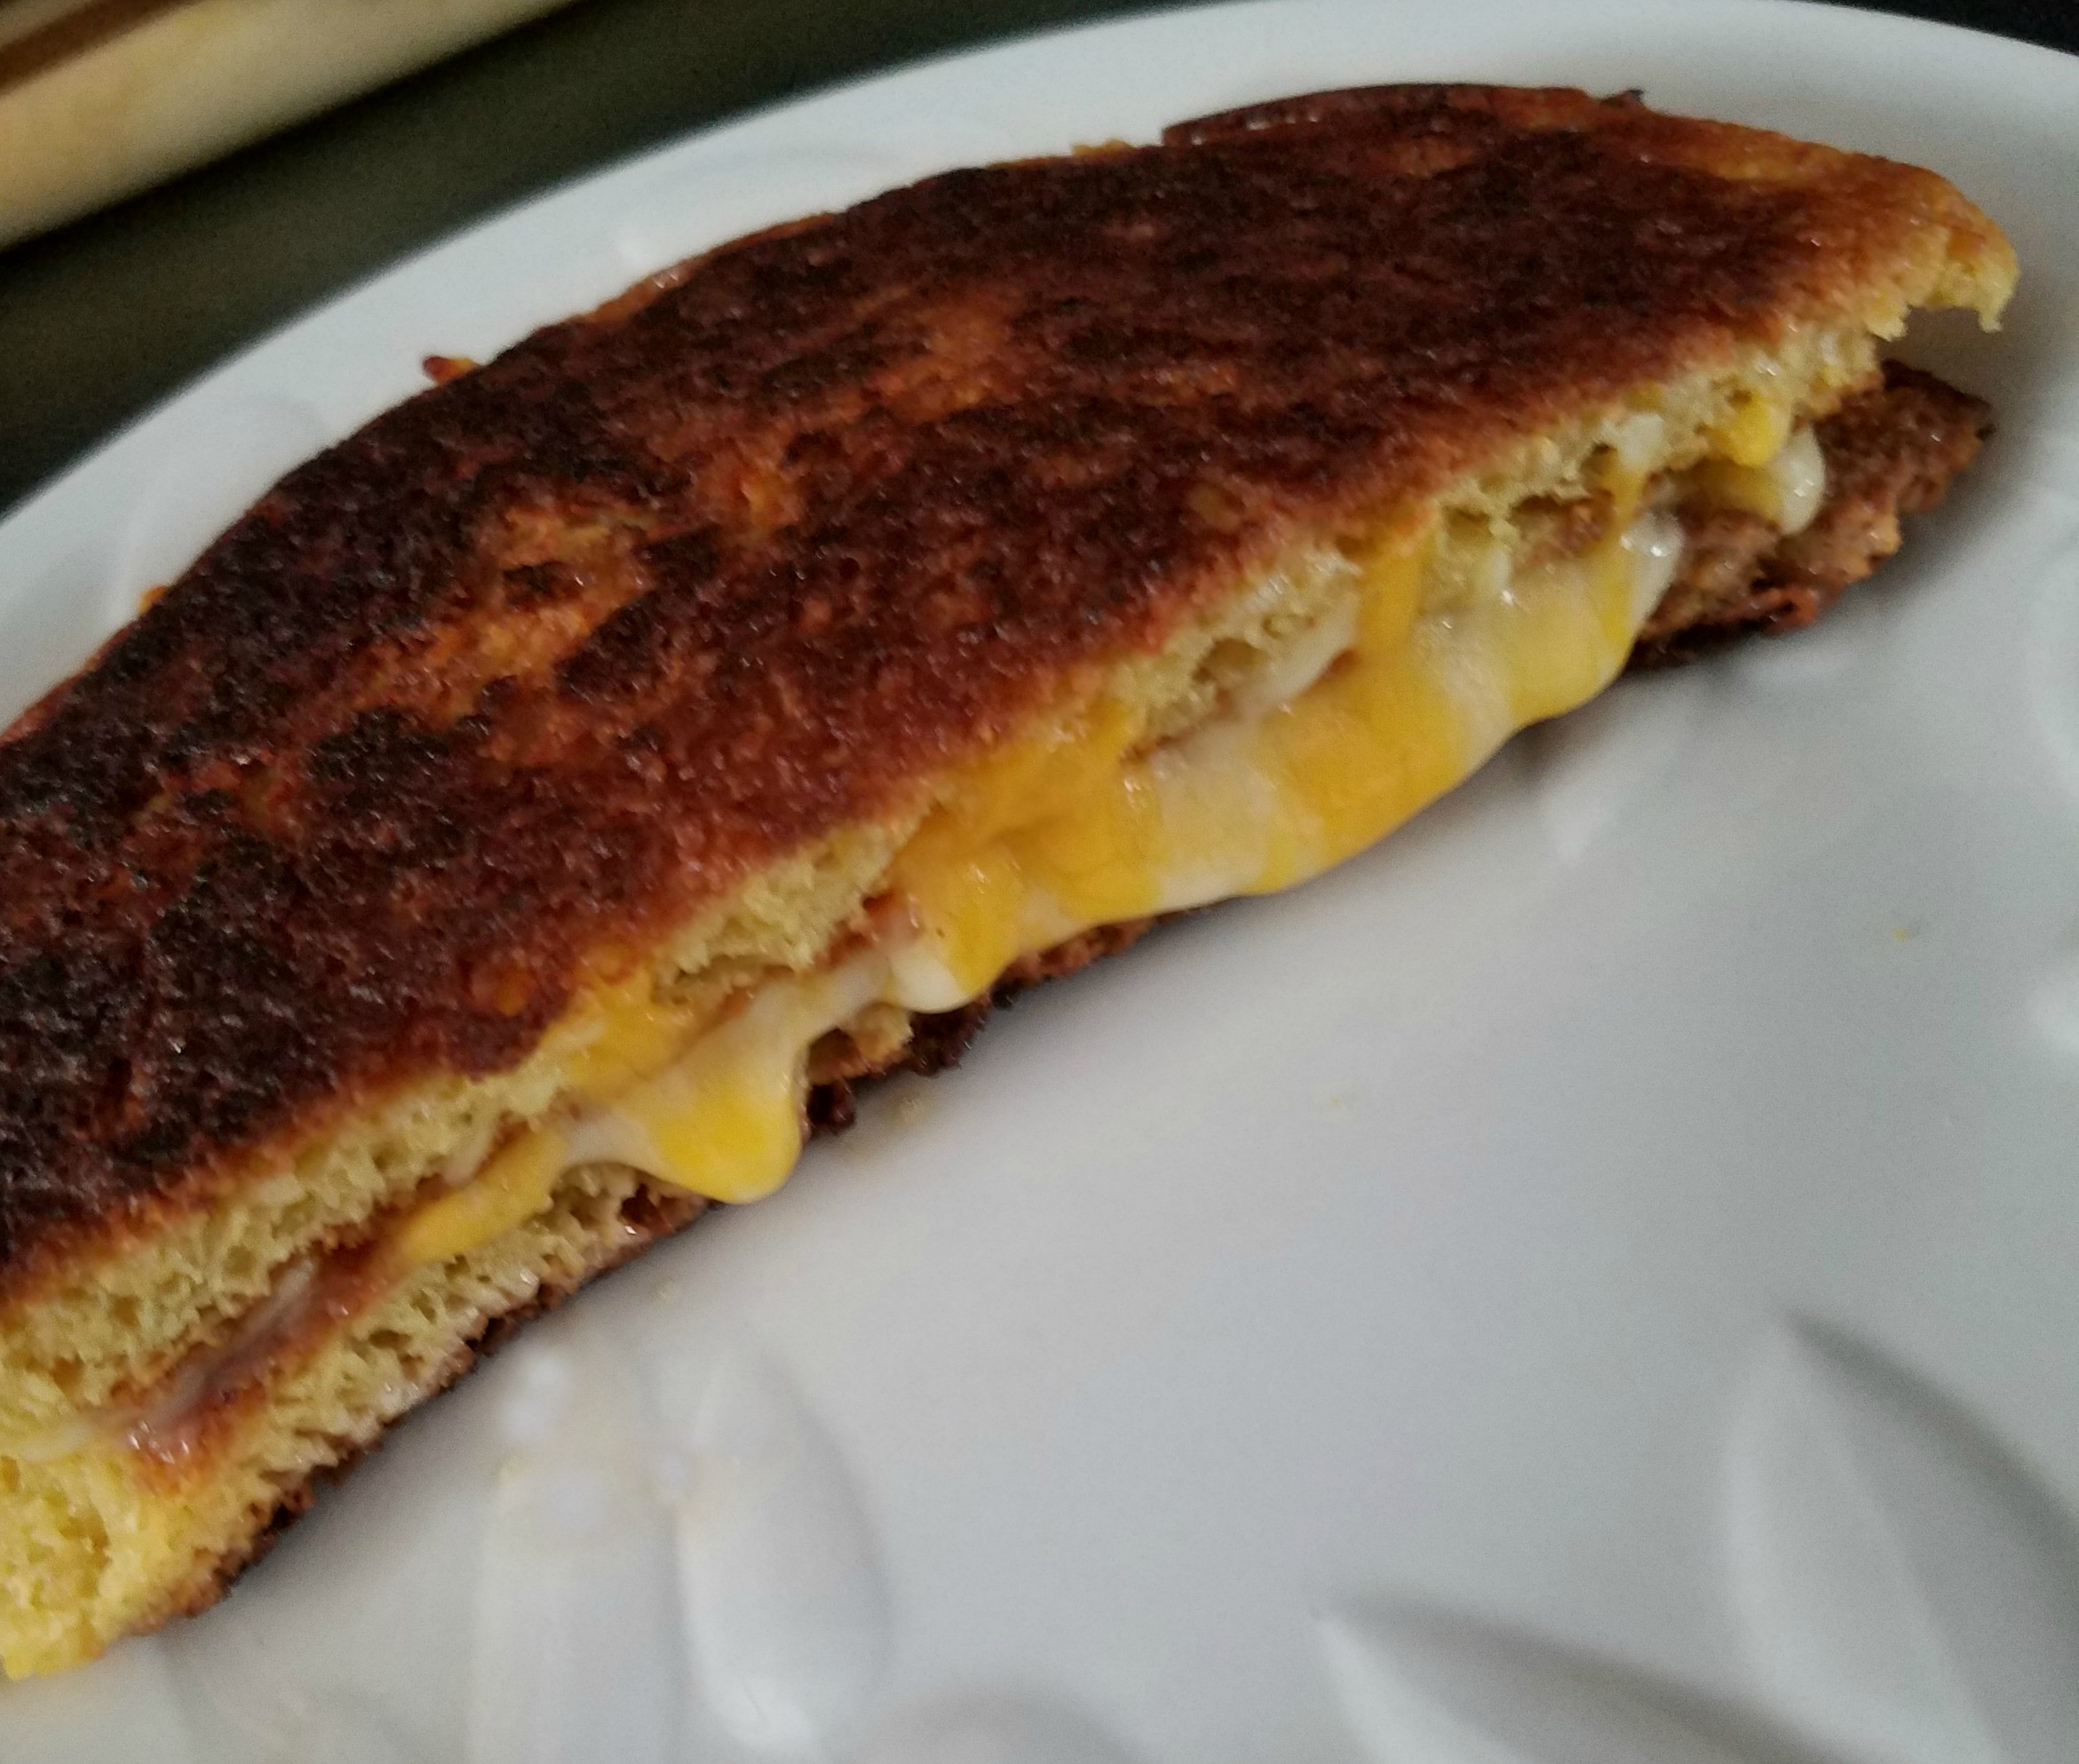 90 Second Keto Bread Grilled Cheese
 Low Carb Keto Friendly 90 Second Bread